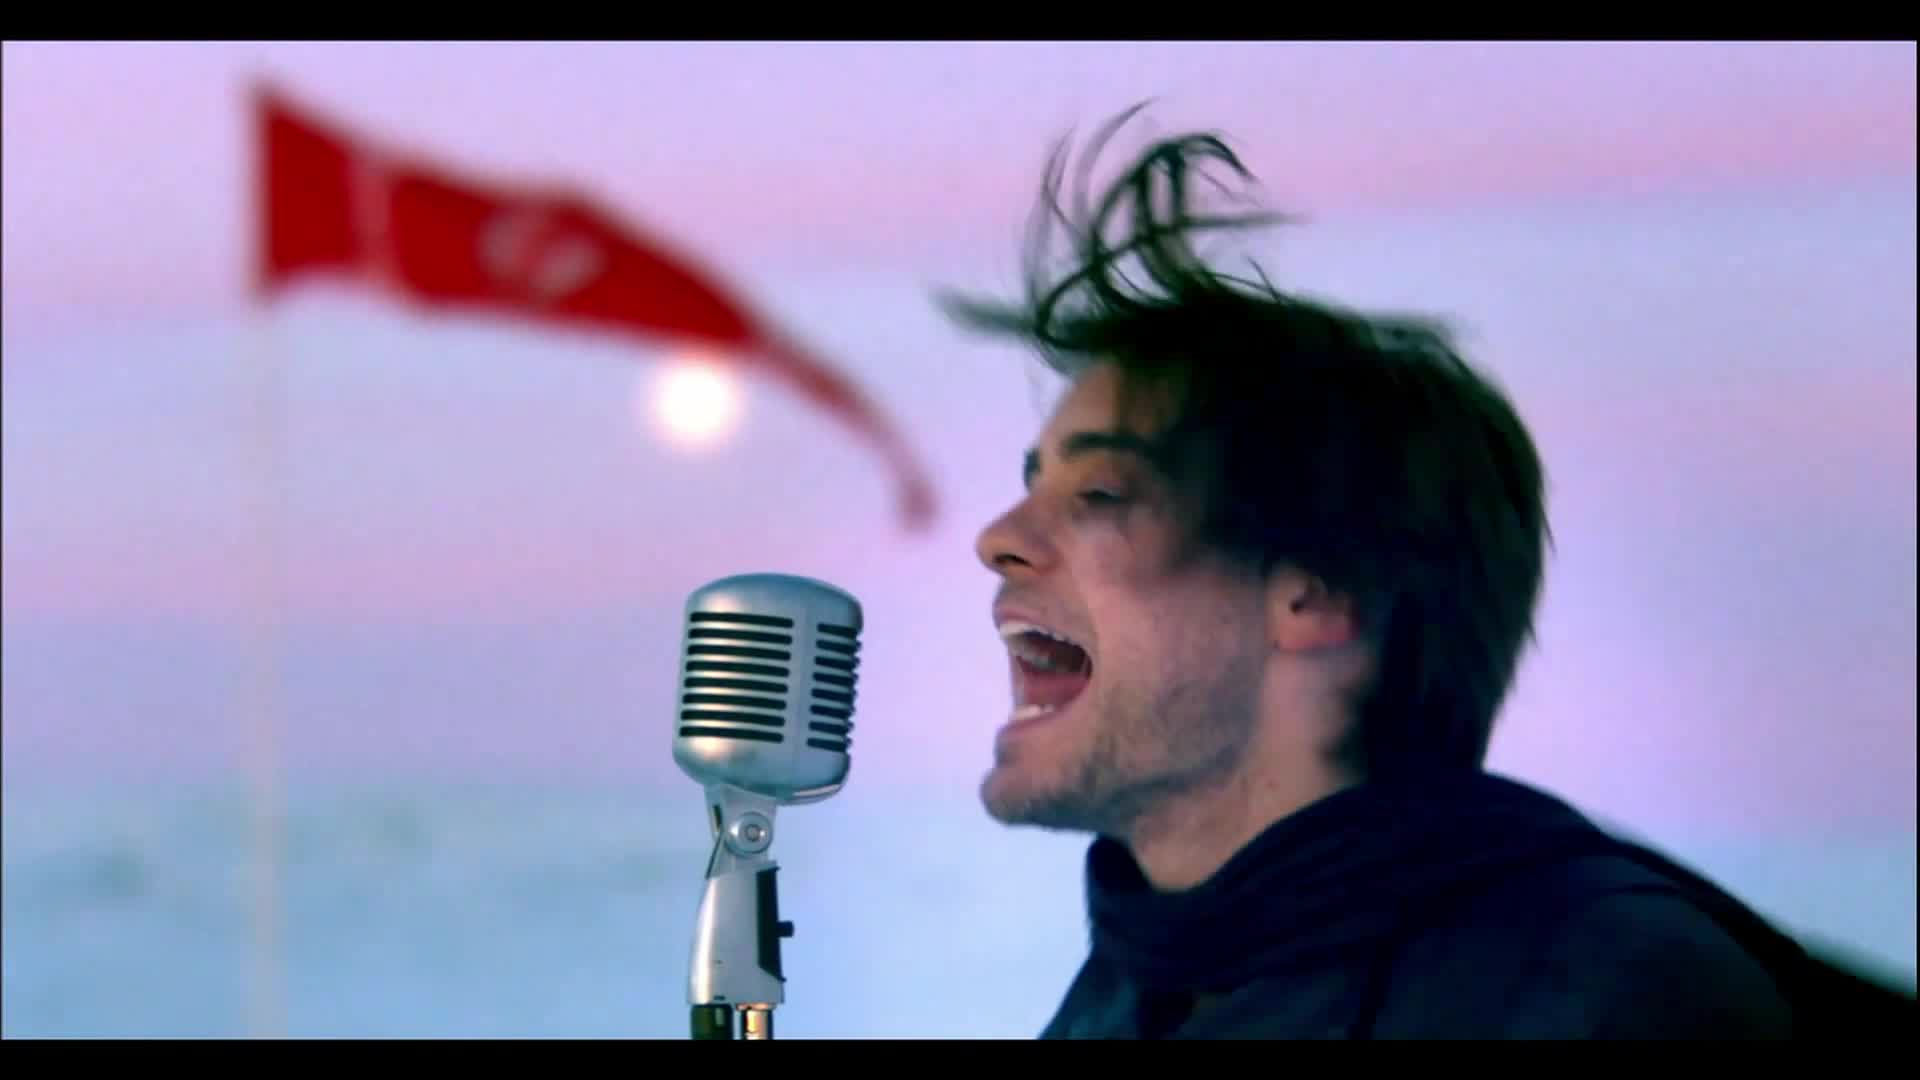 30 seconds to mars lie. Джаред лето бьютифул лайф. 30 Seconds to Mars beautiful Lie. Джаред лето beautiful Lie. 30 Секунд до Марса бьютифул лайф.